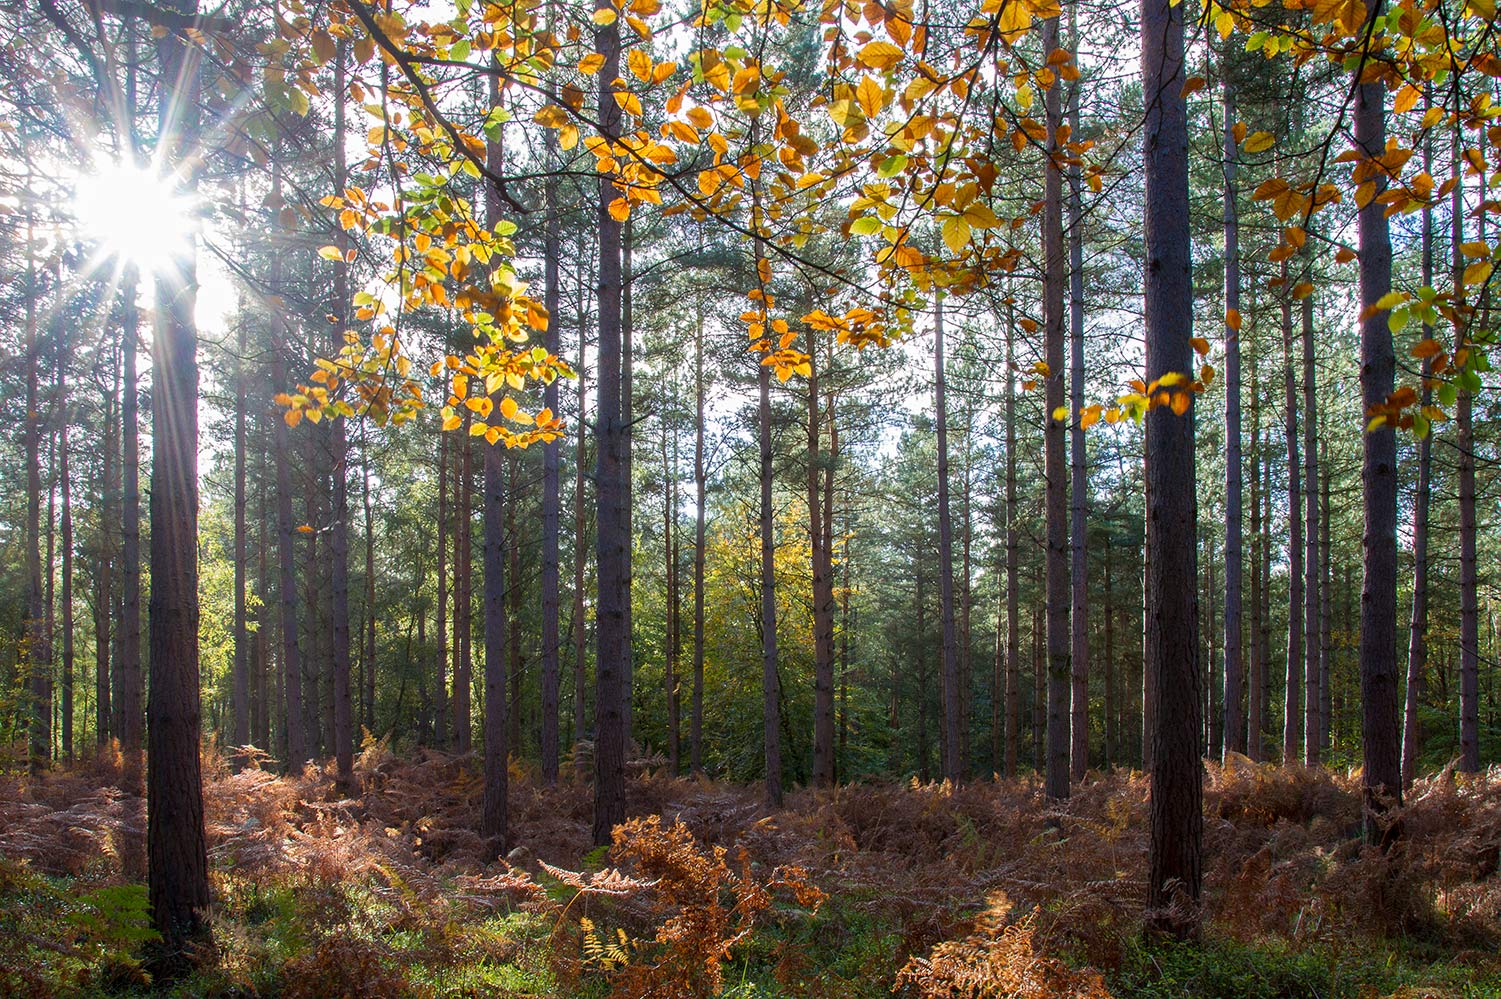 The sun shining through the autumn trees in The New Forest lights up the golden coloured leaves and woodland.